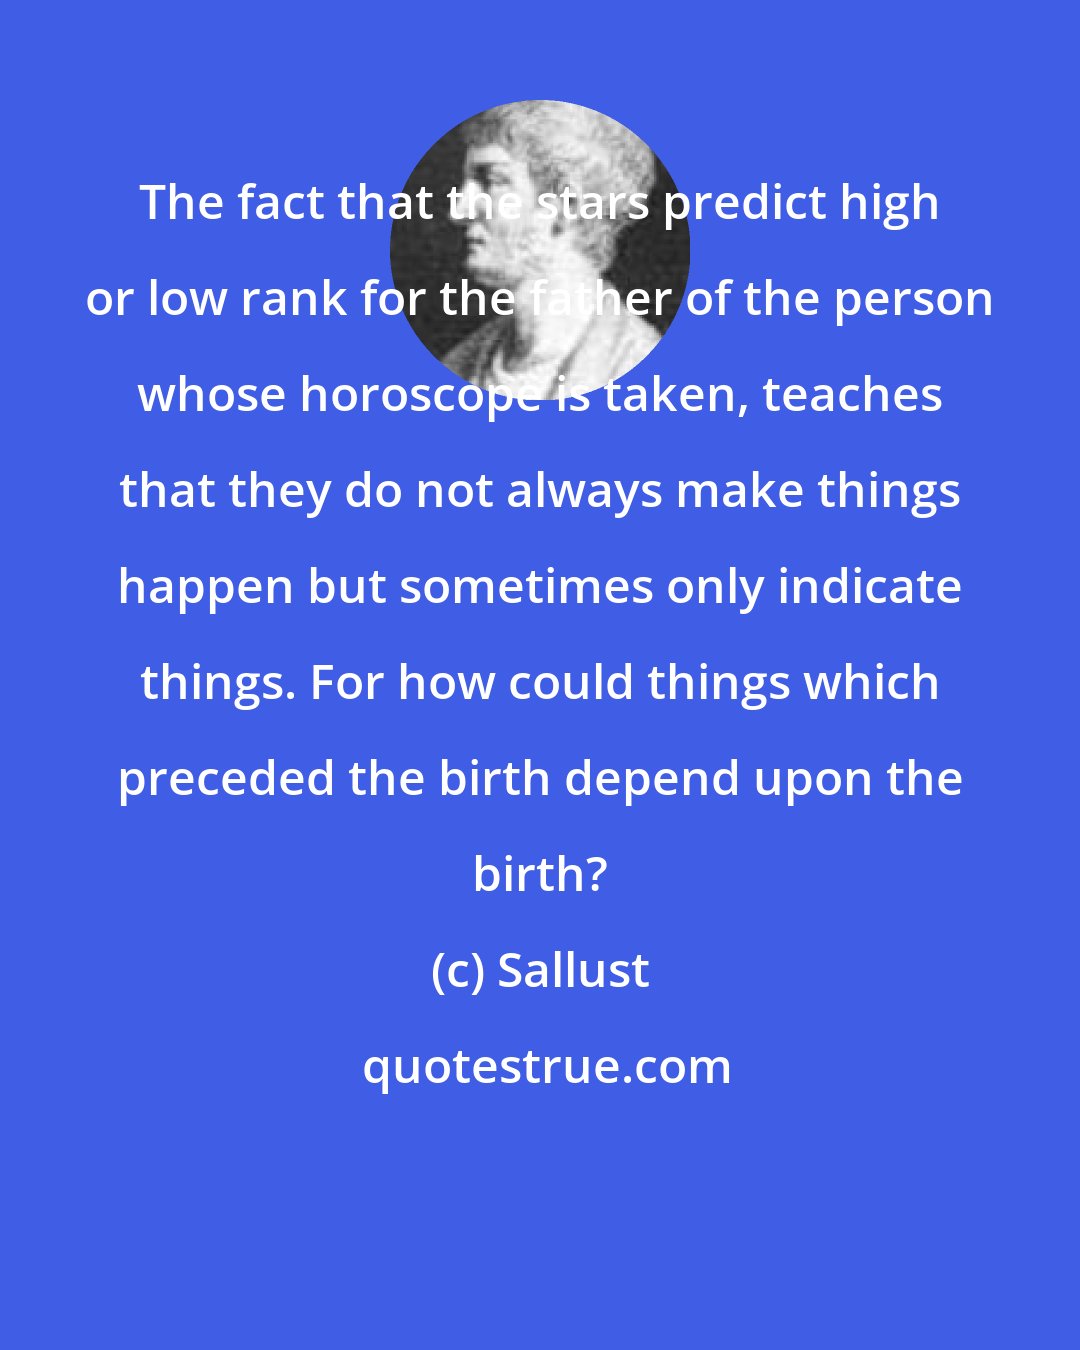 Sallust: The fact that the stars predict high or low rank for the father of the person whose horoscope is taken, teaches that they do not always make things happen but sometimes only indicate things. For how could things which preceded the birth depend upon the birth?